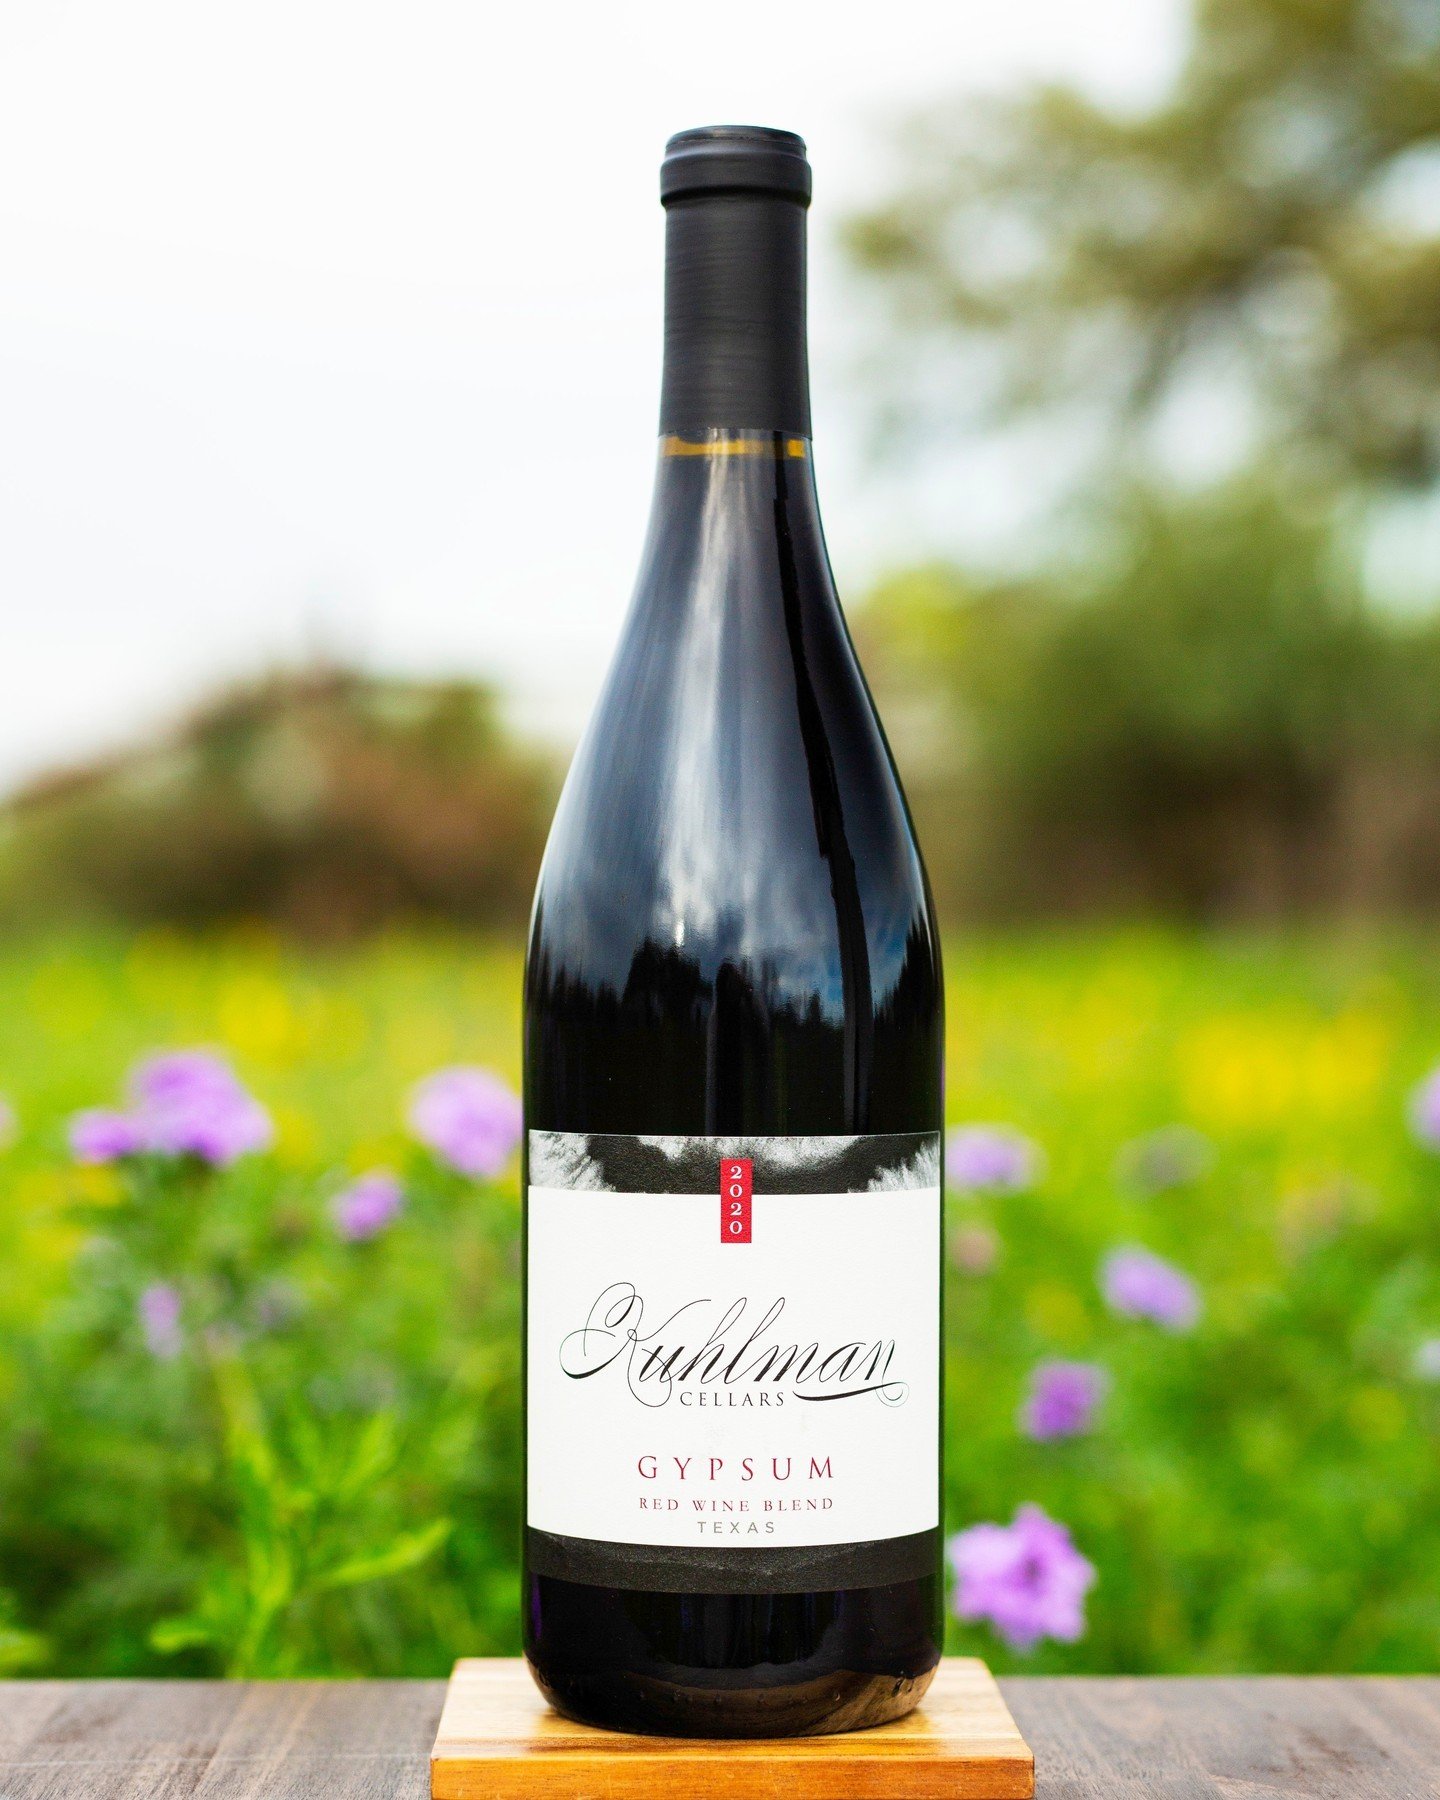 Our Vina Vita Wine Club members will be the first to try our new 2020 Gypsum this weekend at our Pickup Party! This Mediterranean blend has notes of candied cherry, vanilla, and clove and pairs perfectly with Spanish paella. 🍷

Be sure to join our W